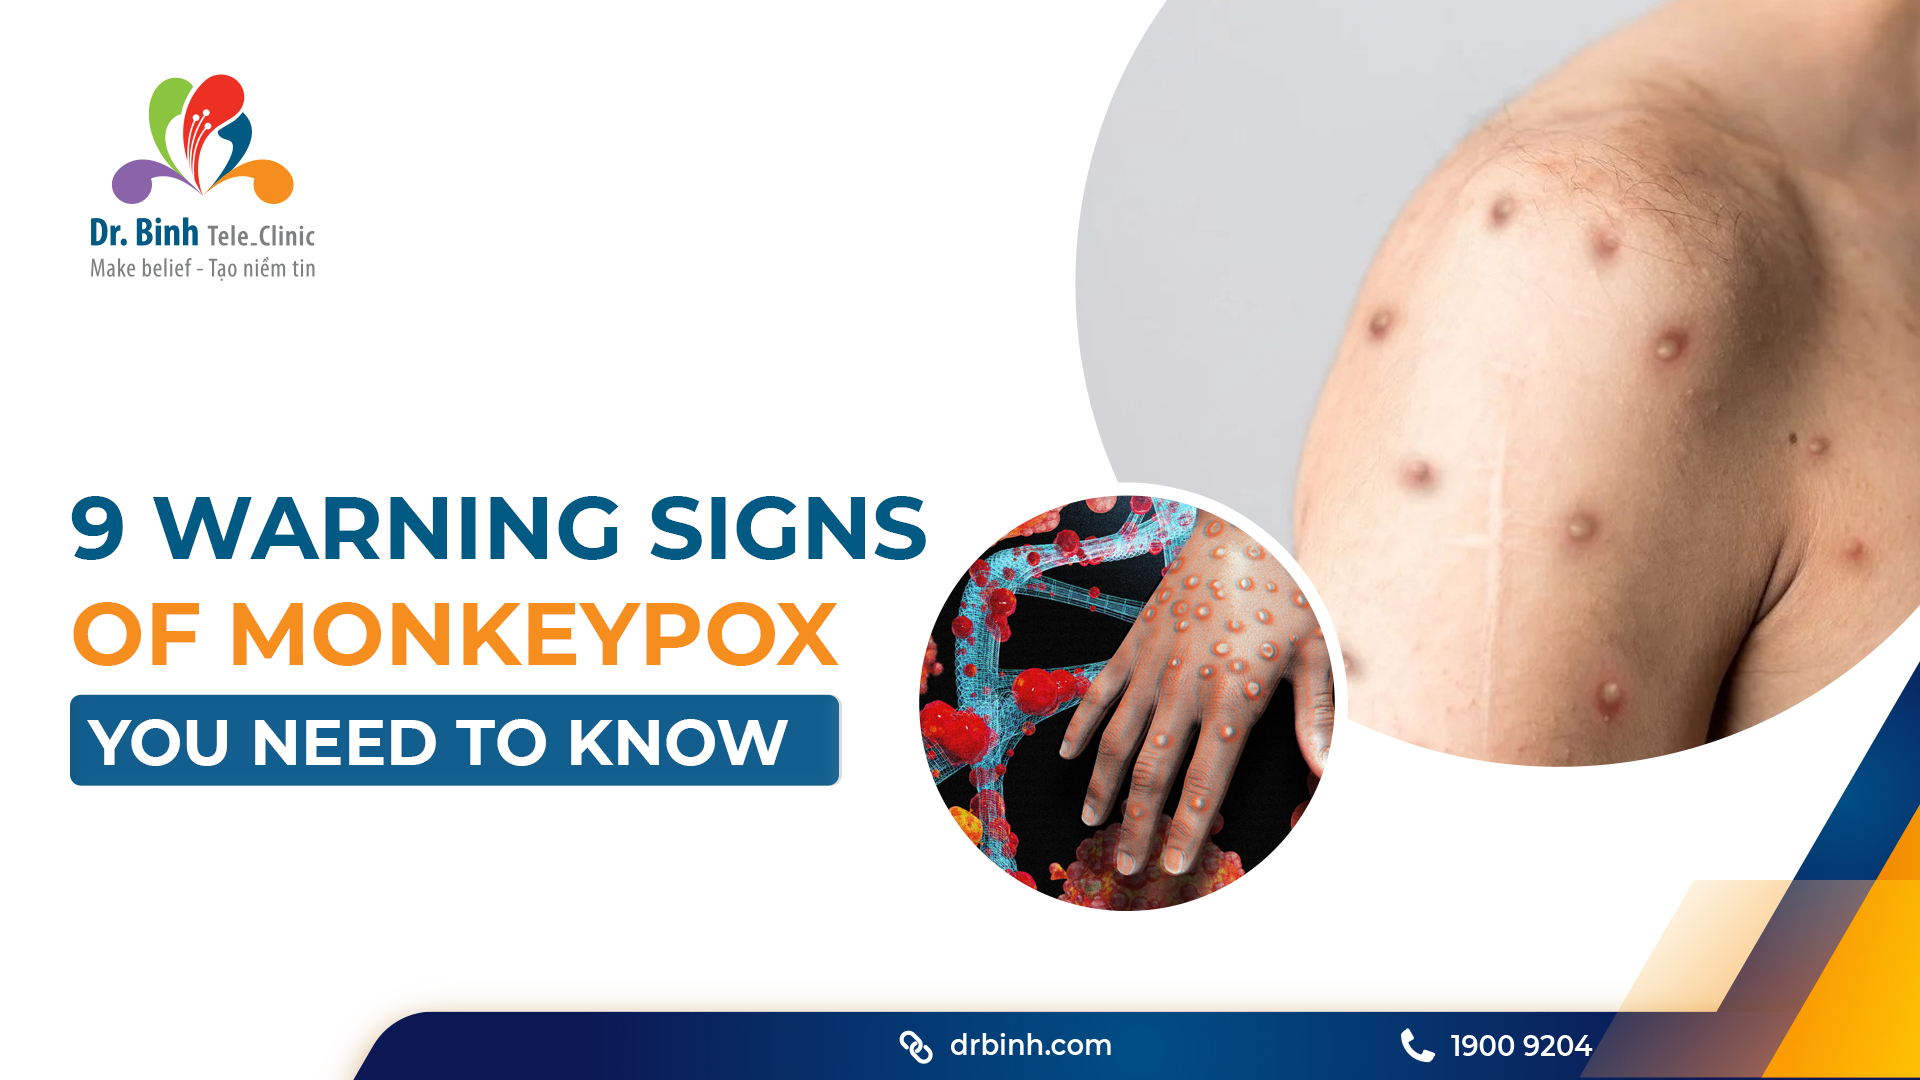 Signs of monkeypox